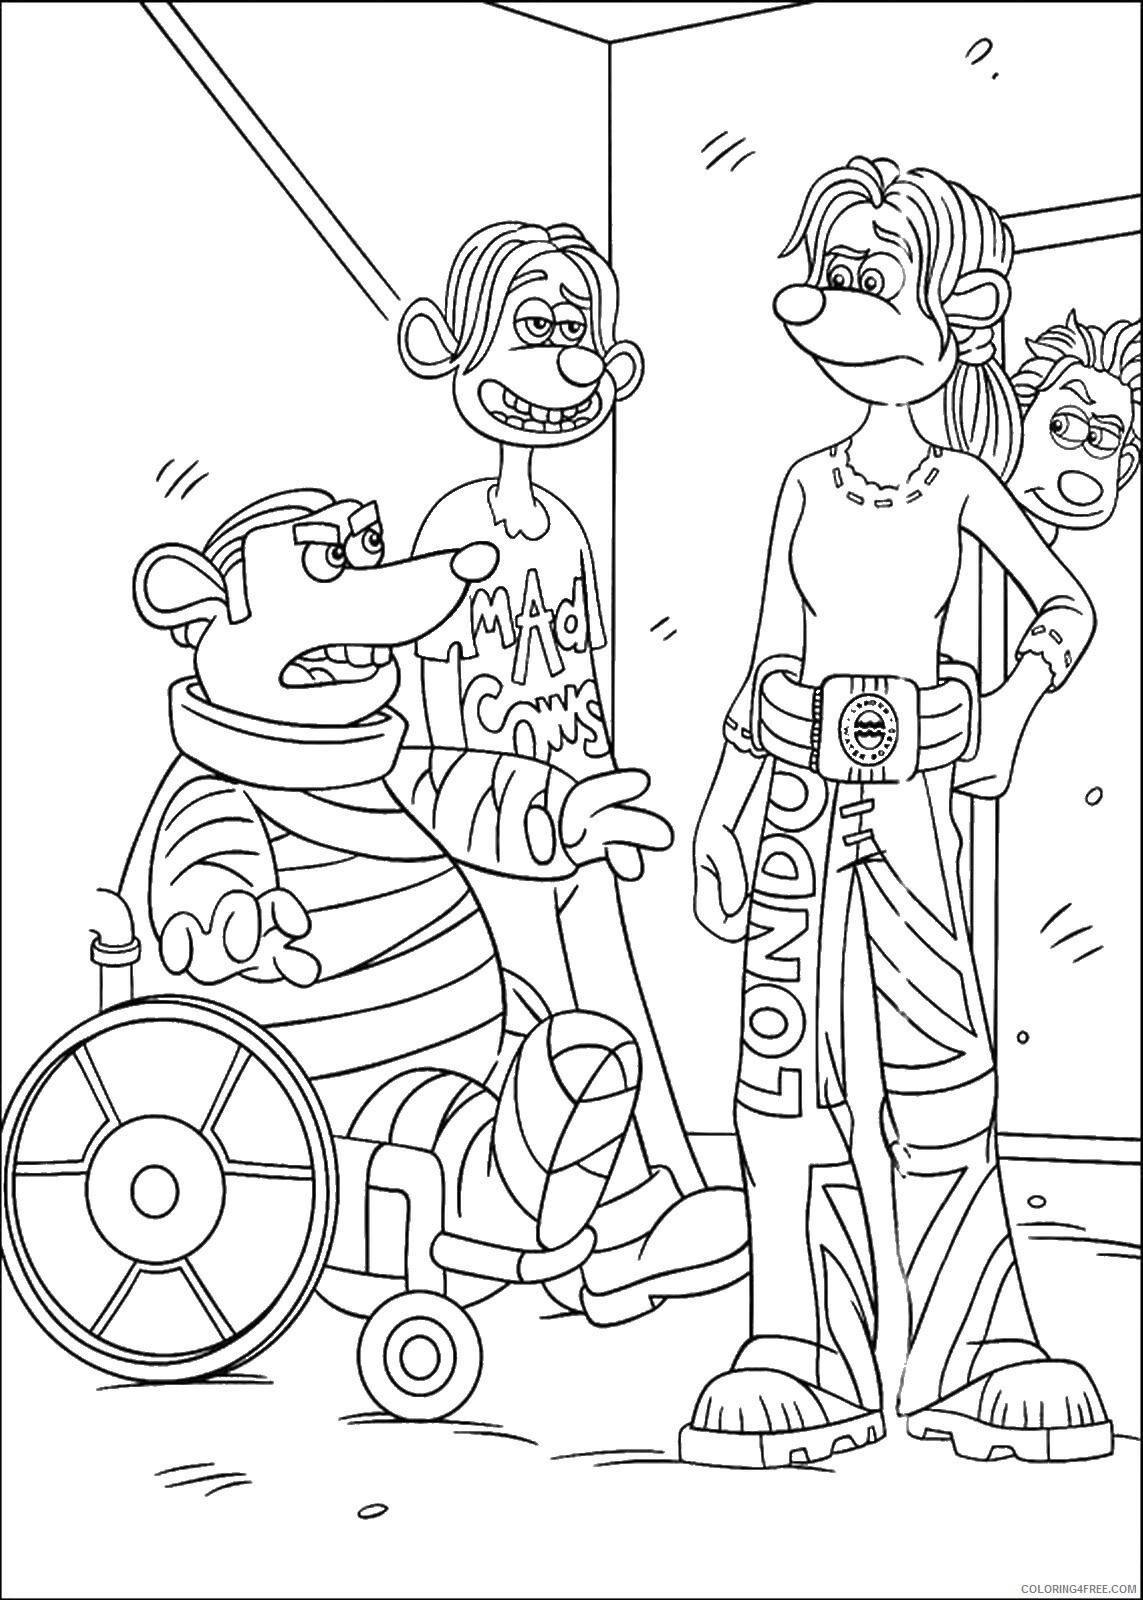 Flushed Away Coloring Pages TV Film flushed_cl_10 Printable 2020 02969 Coloring4free